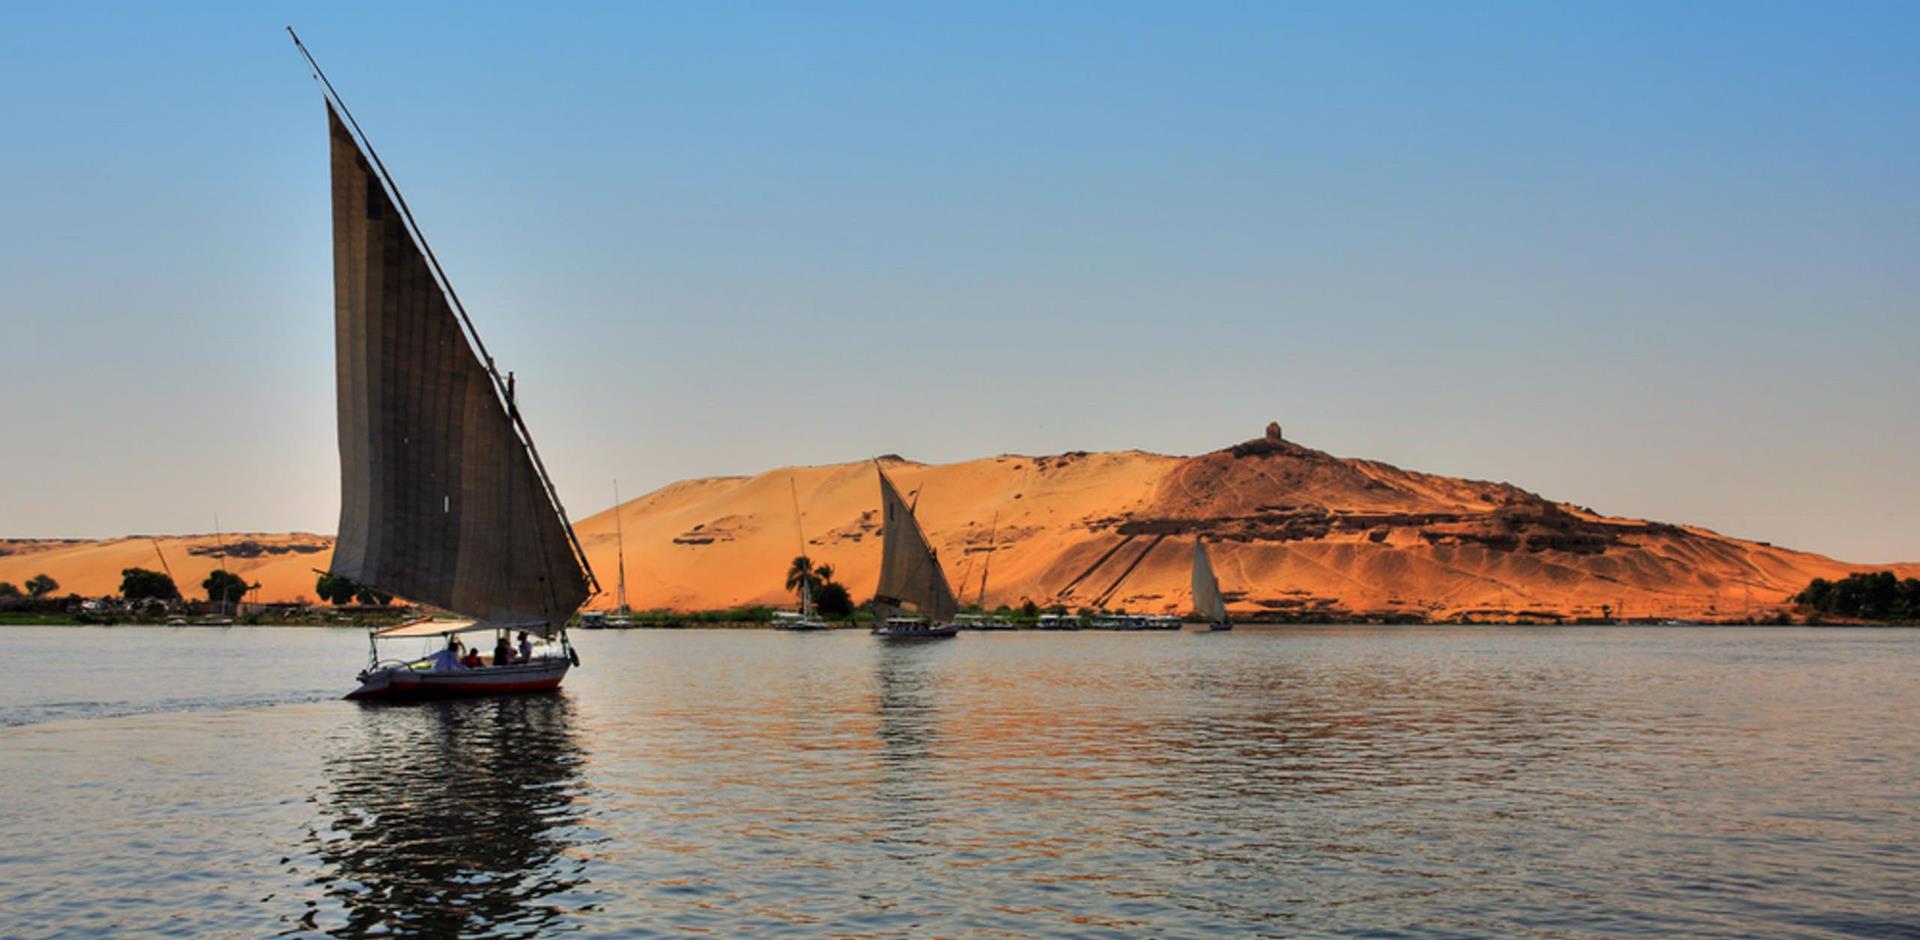 Explore the Nile by felucca